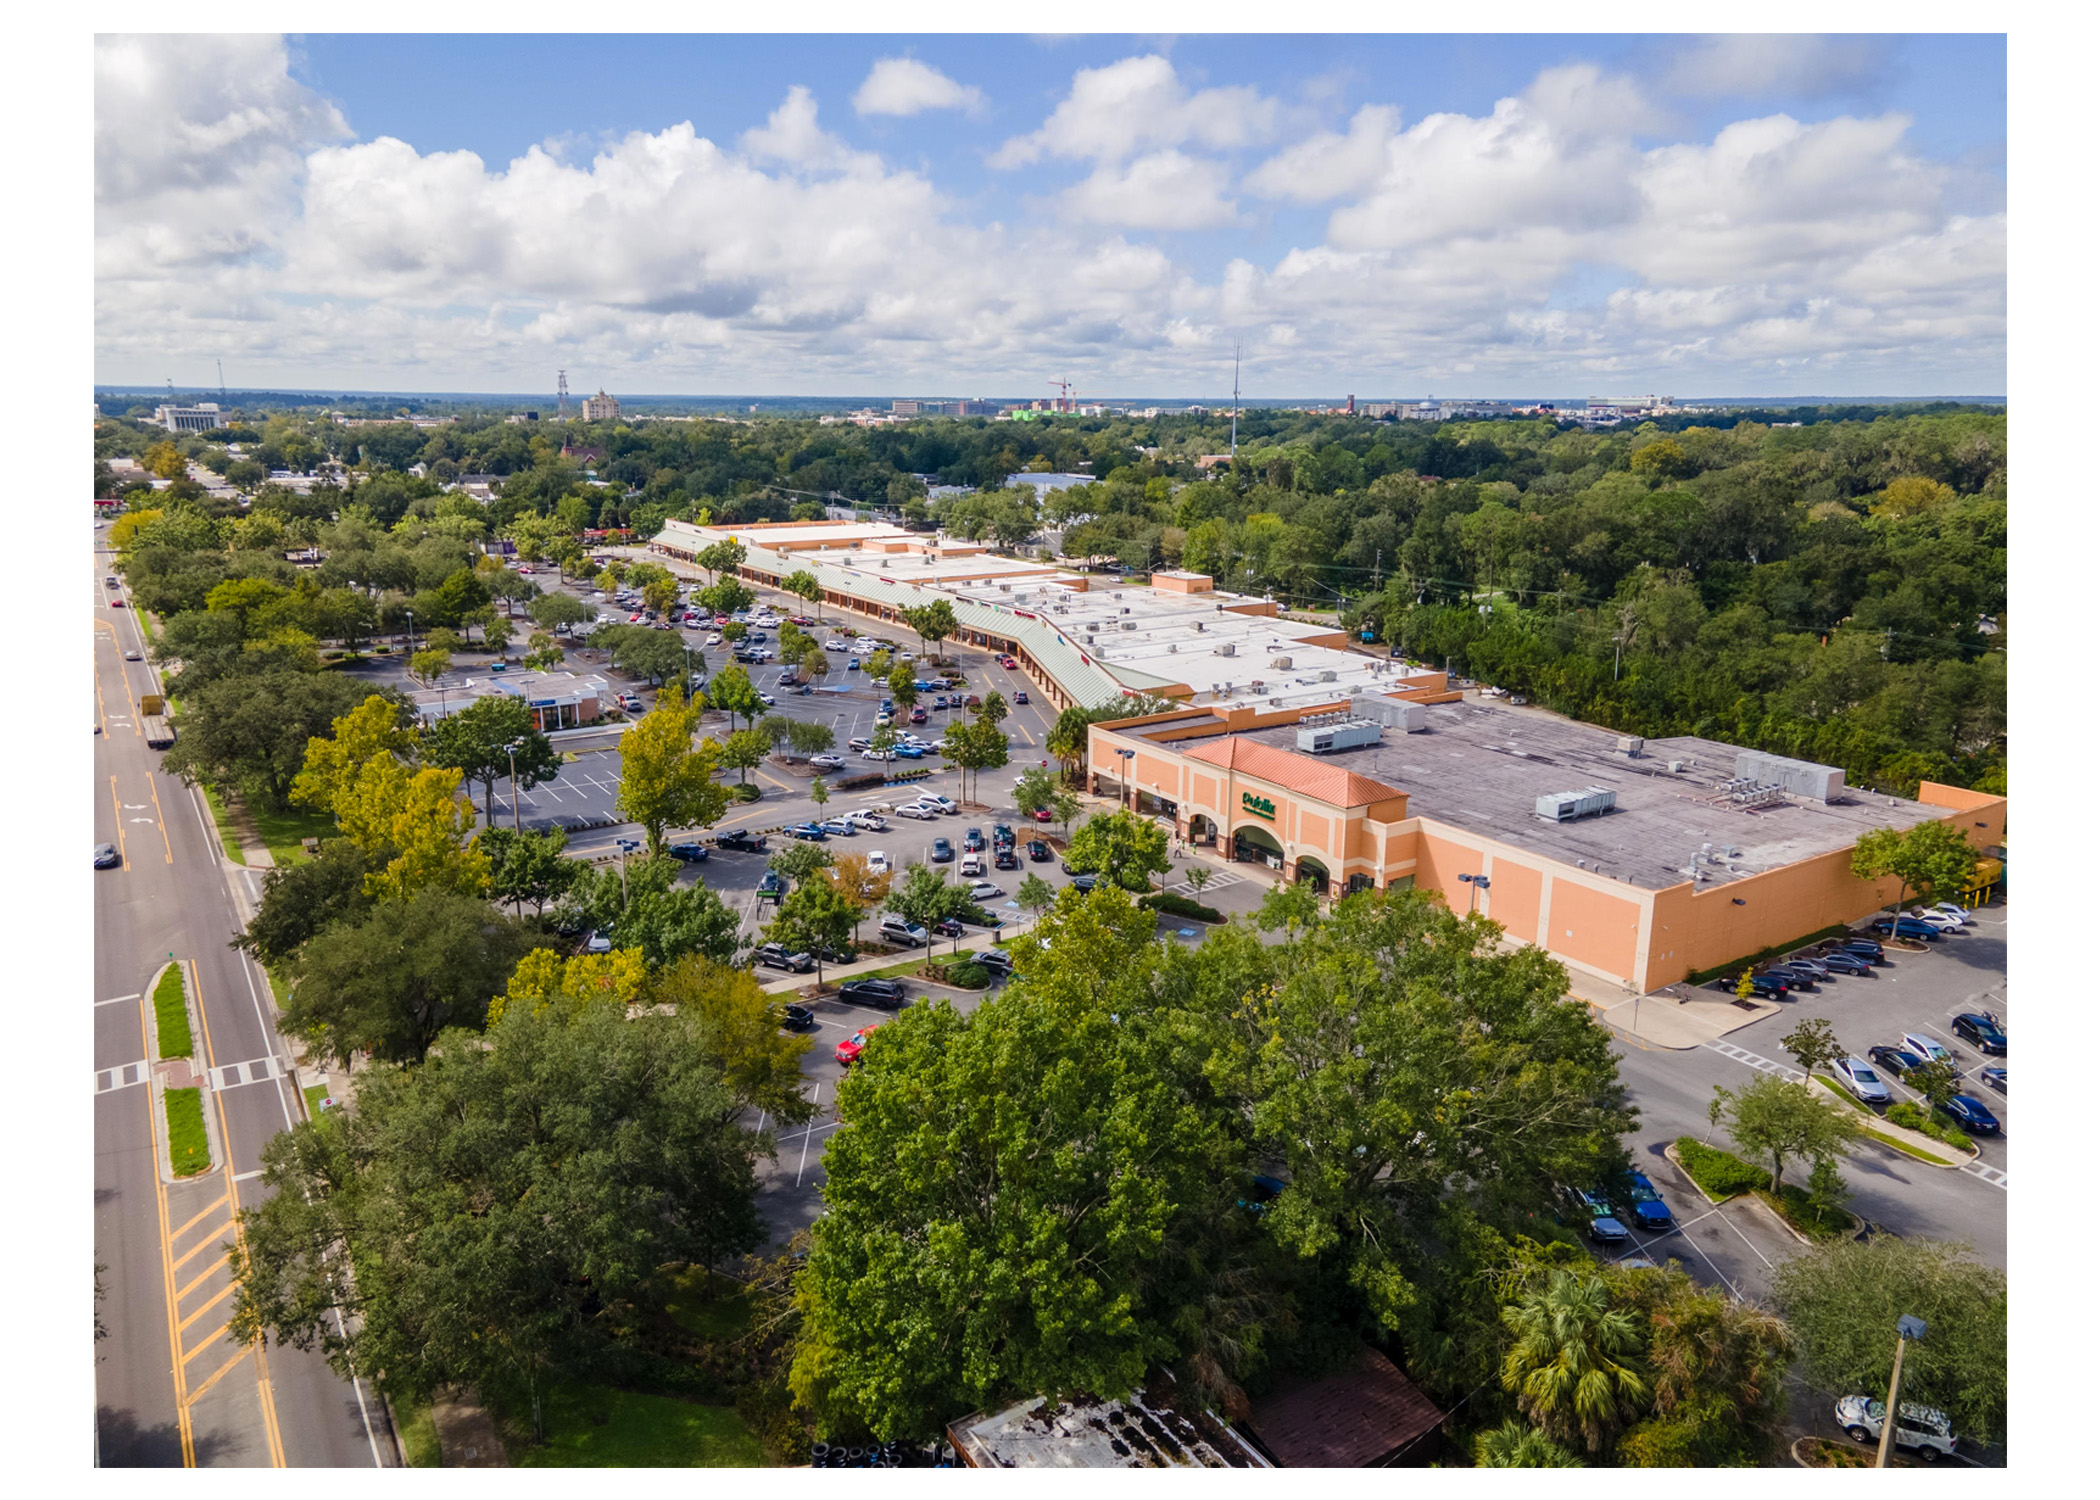 Gainesville Shopping Center, Publix, parking lot and NW2nd Street aerial view.